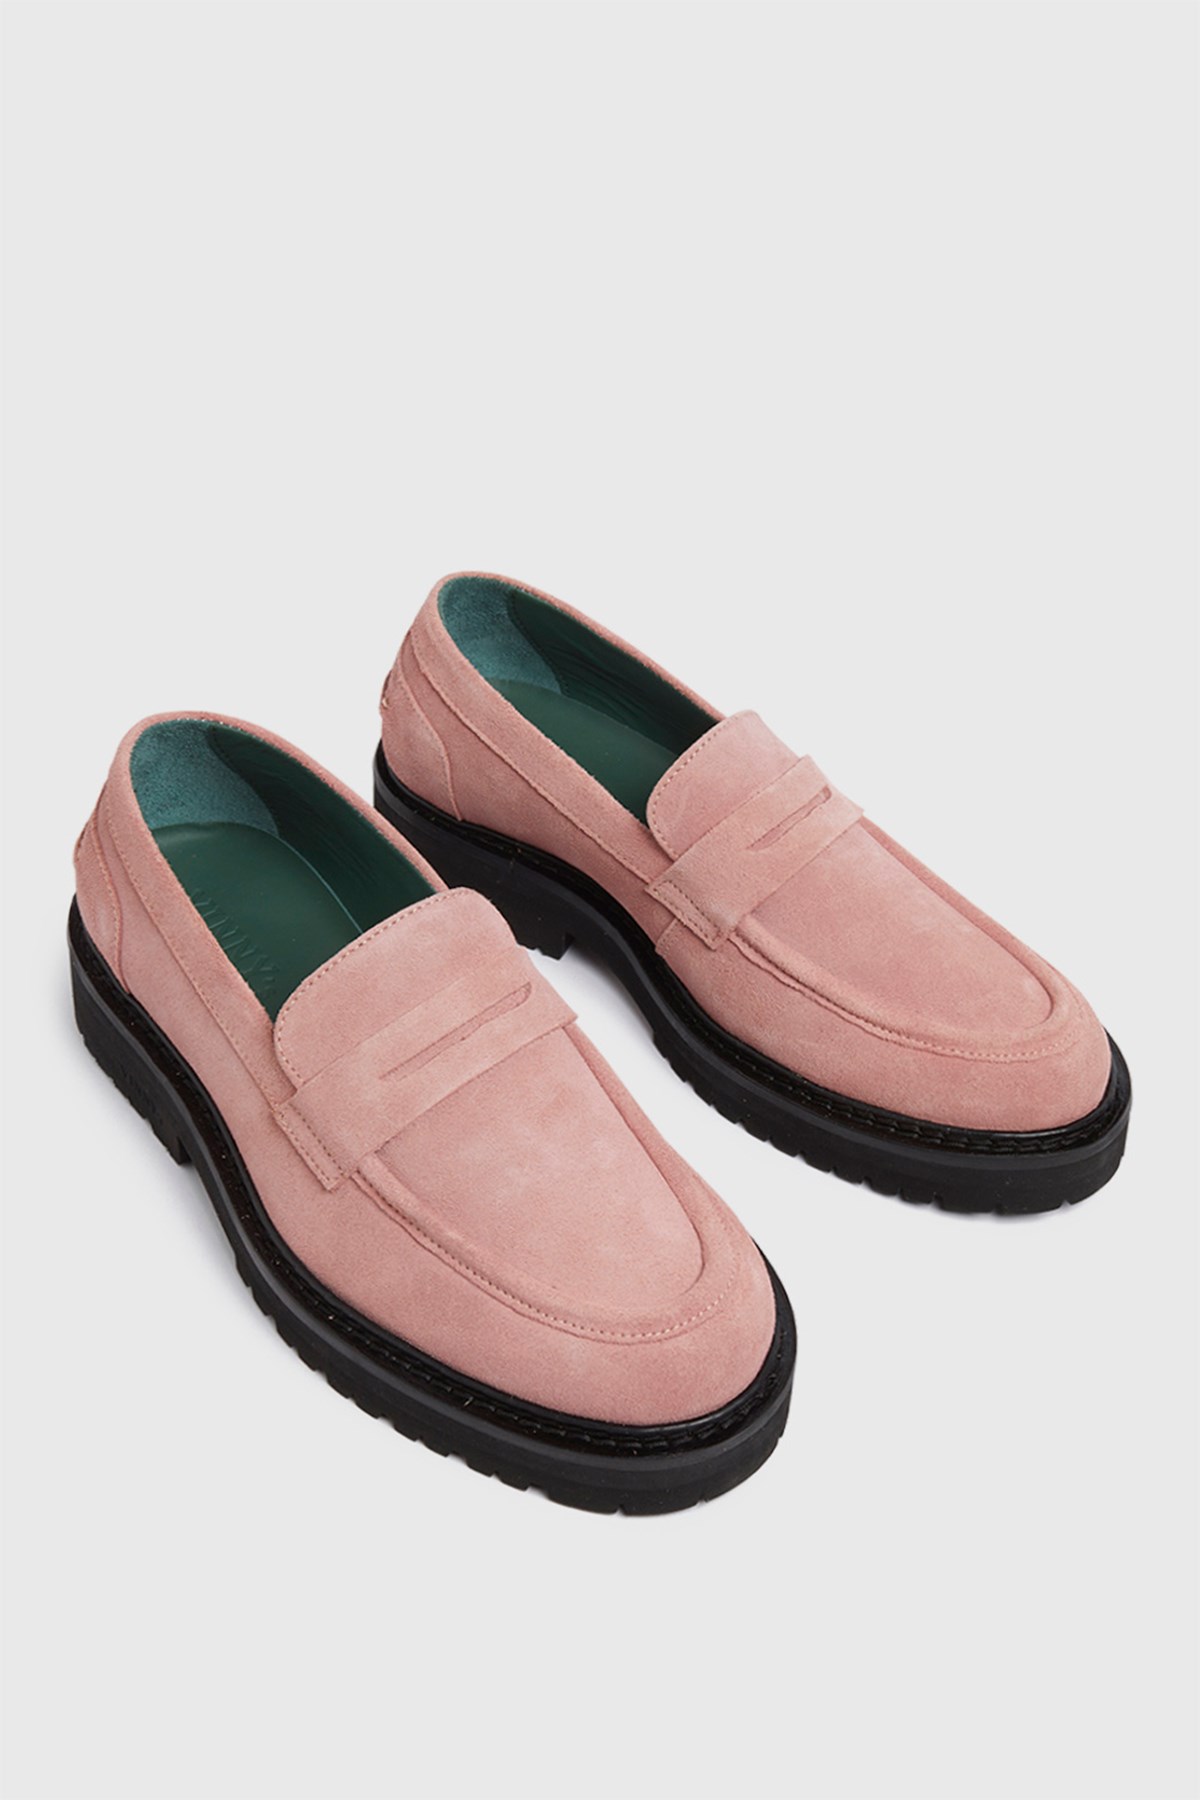 Vinny's Wood Wood x Richee Penny Loafer Pink suede